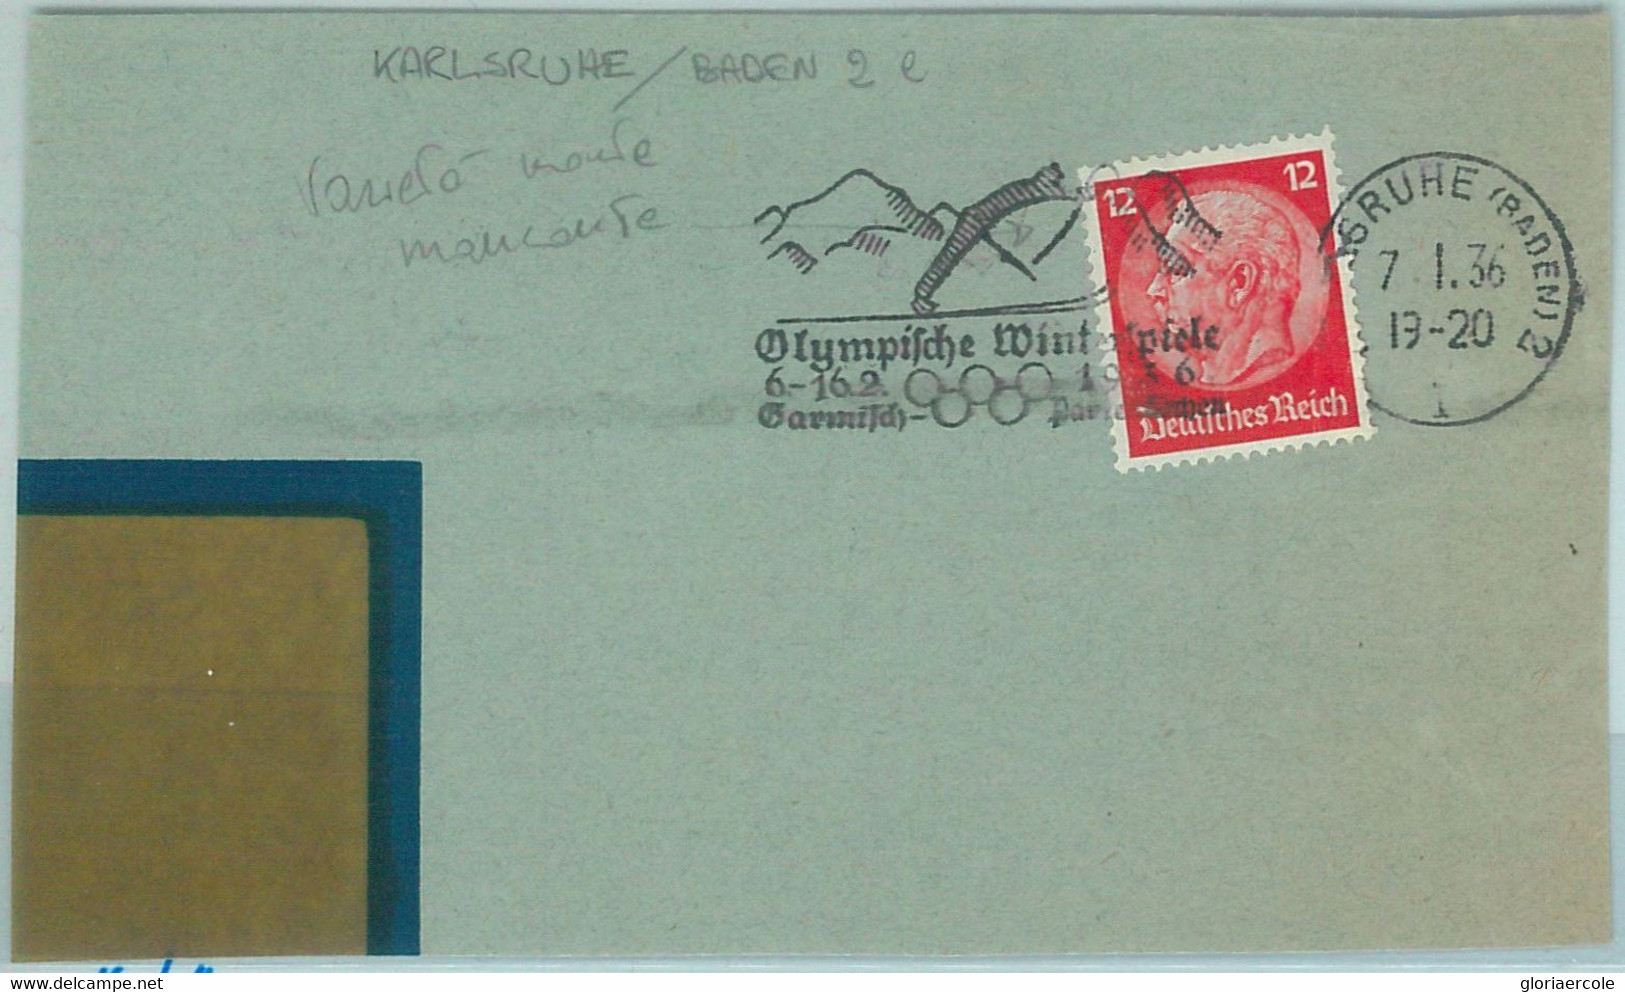 68294 - GERMANY - POSTAL HISTORY - SPECIAL POSTMARK On COVER - 7.1.1936 Winter Olympic Games, Karlsruhe - Invierno 1936: Garmisch-Partenkirchen